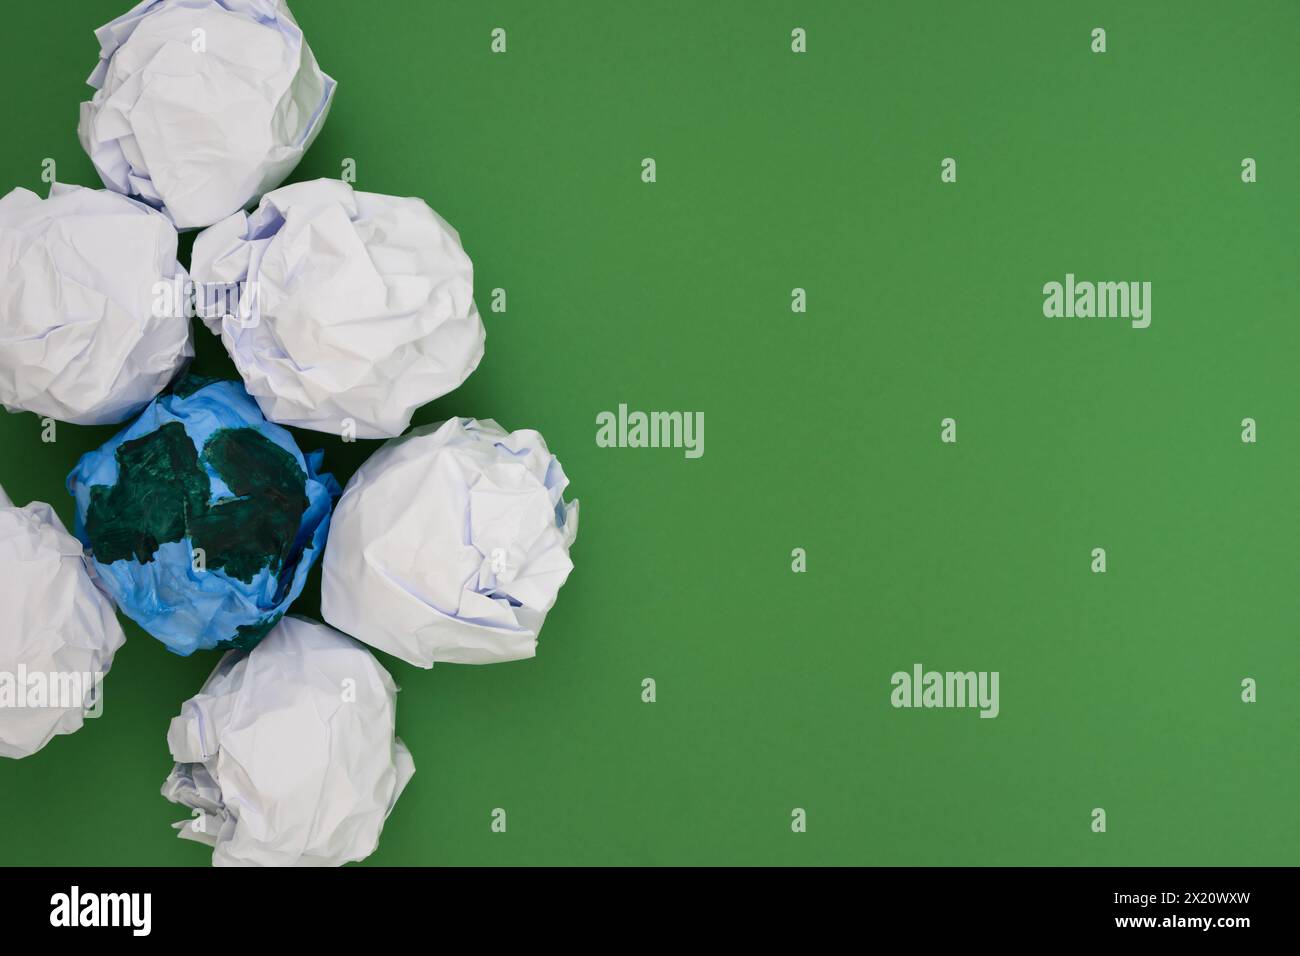 Numerous white paper scattered across a vibrant green surface, copy space. Earth day concept. Stock Photo